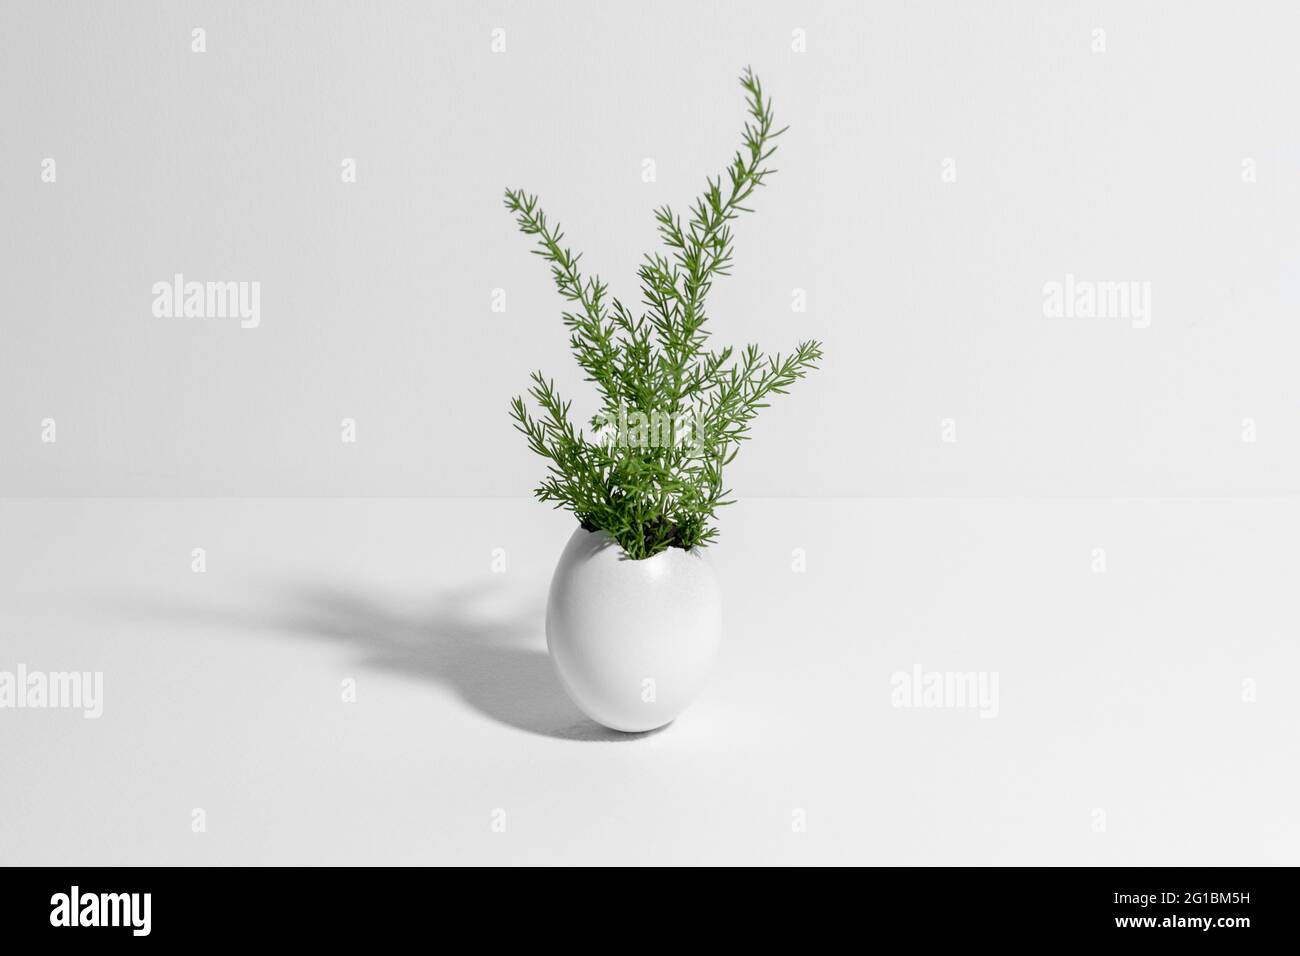 Wild plant coming from white egg shell. White background. Creative white and green background Stock Photo